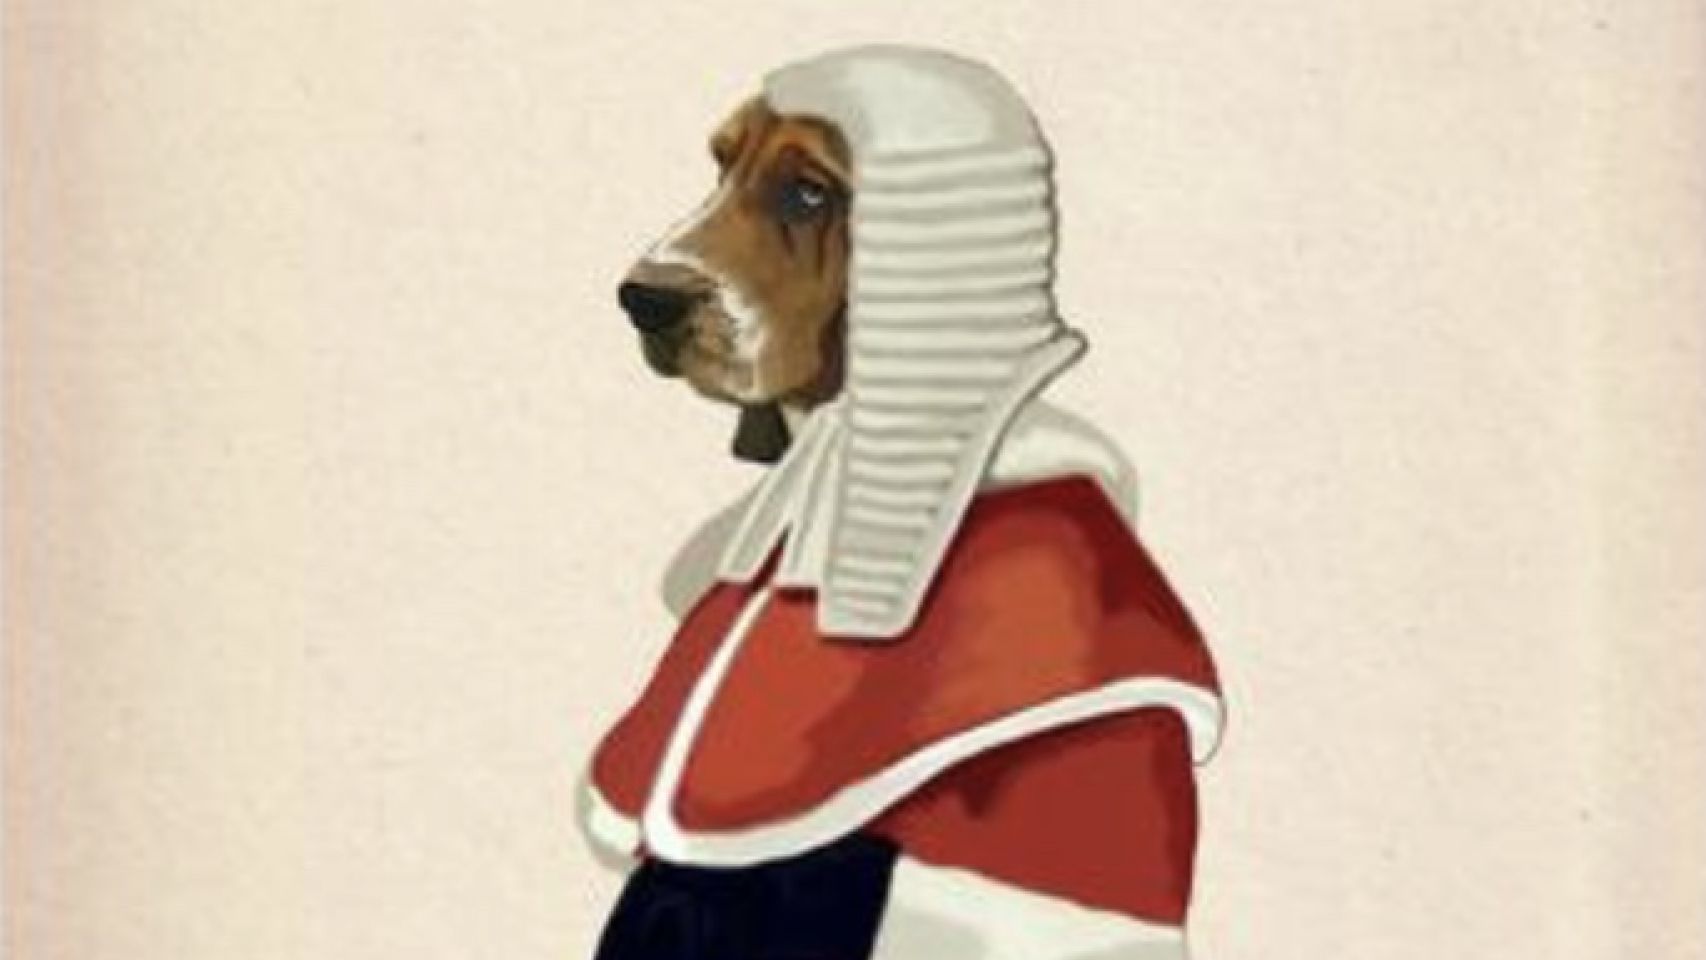 A dog in court